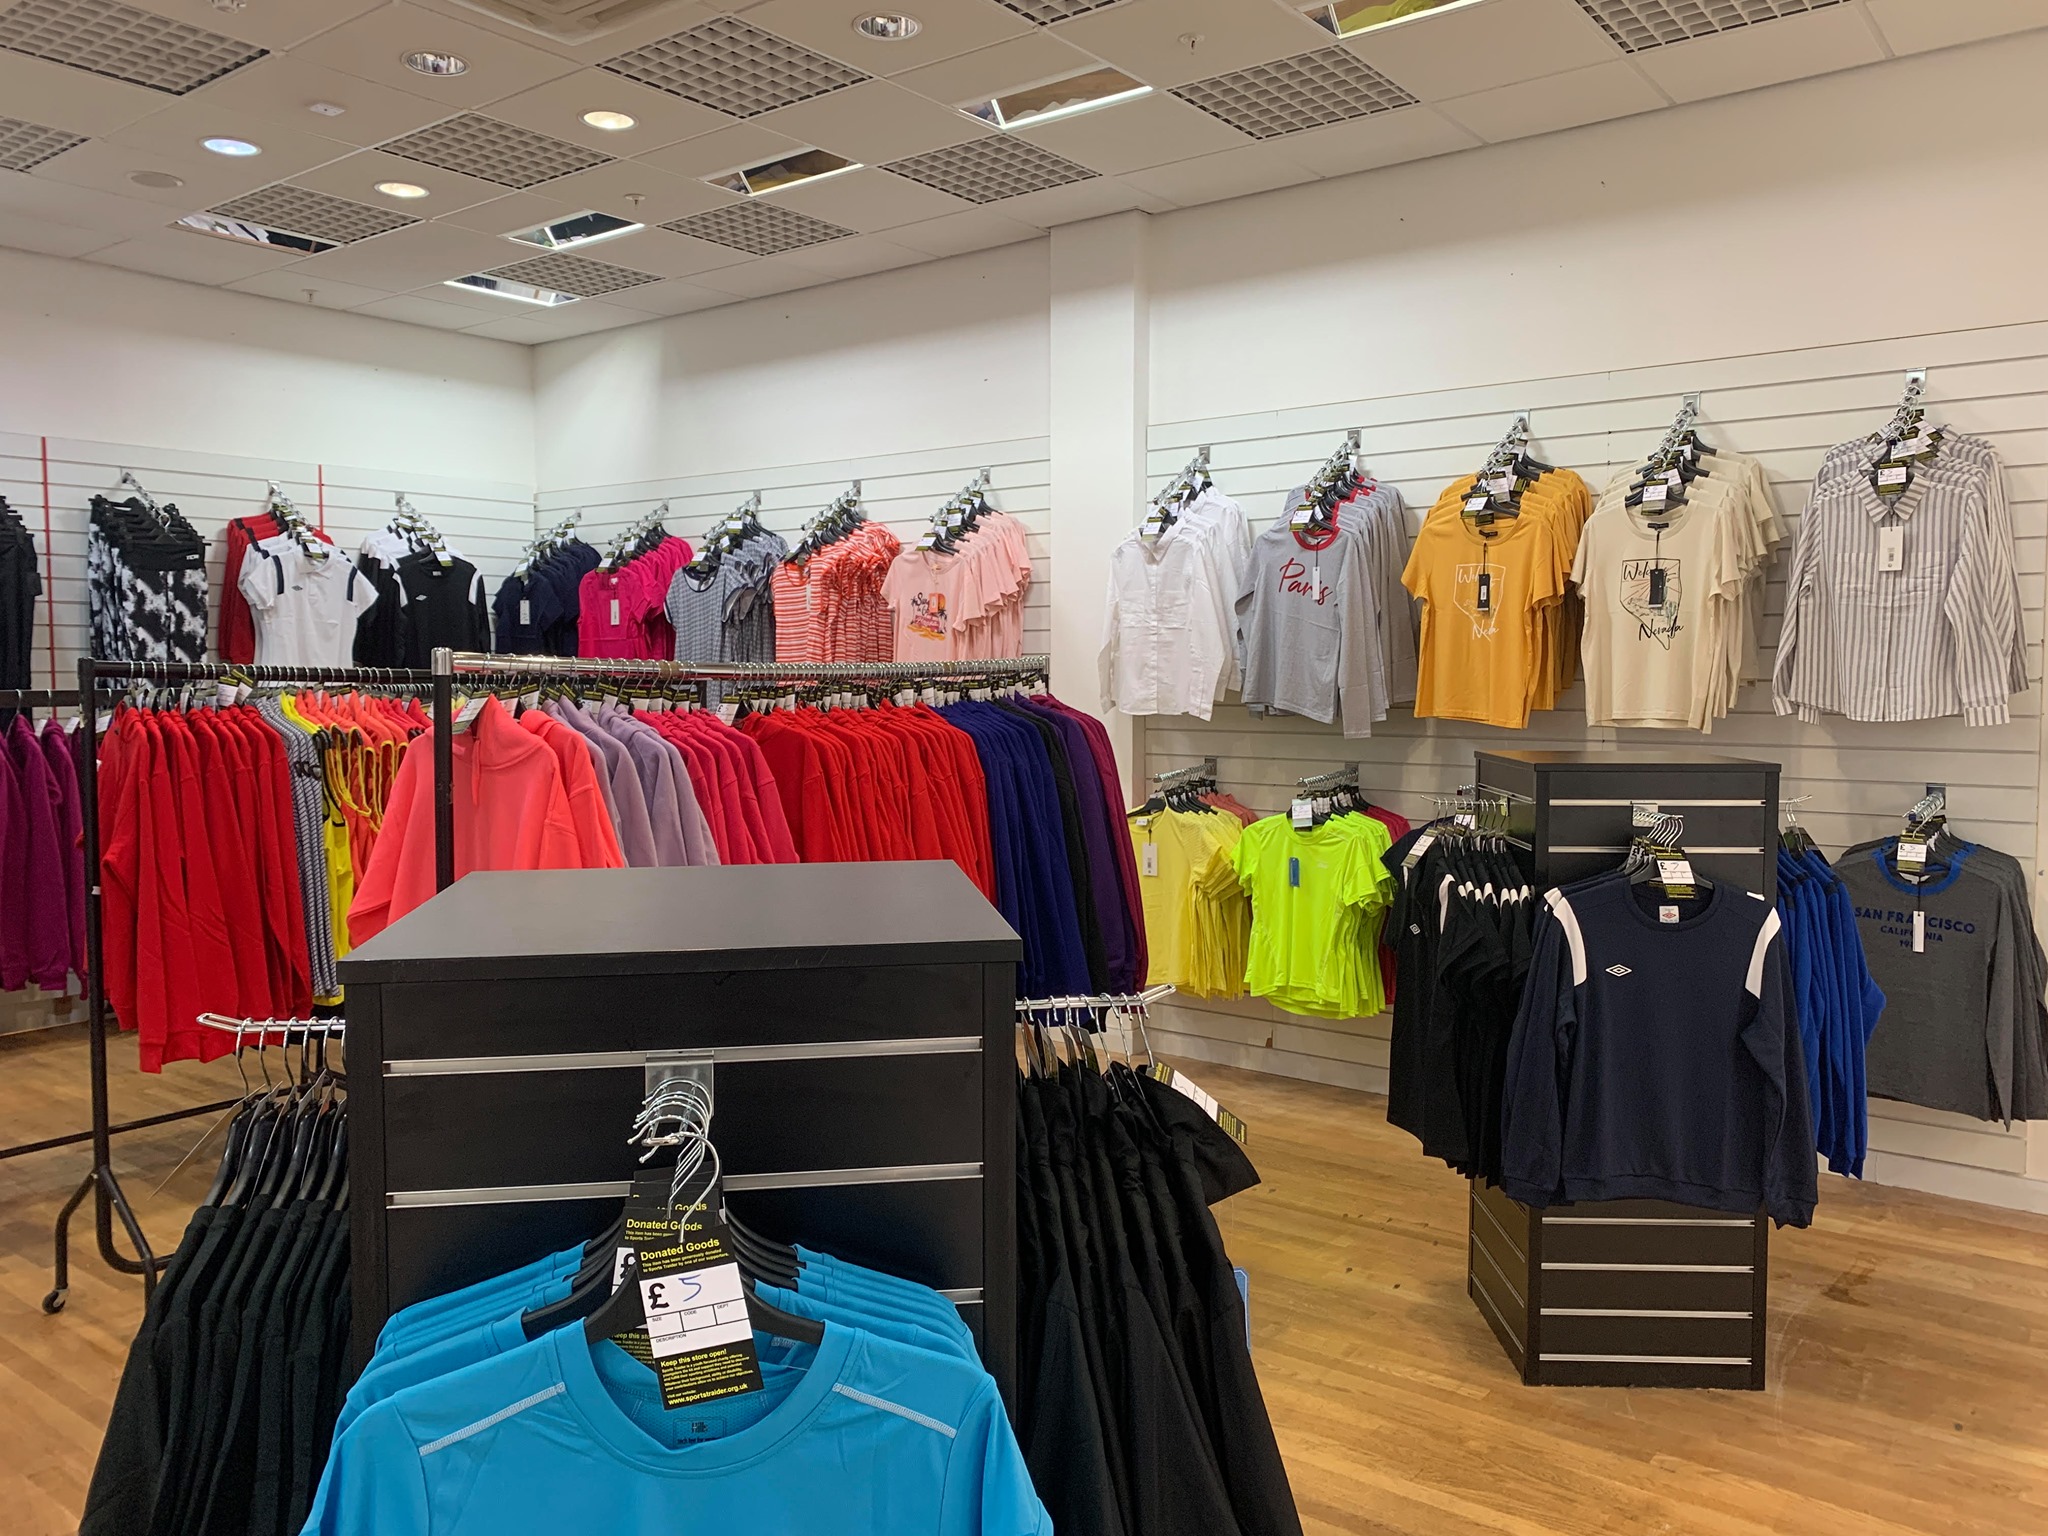 Sports Traider opens second store – The Potteries Centre